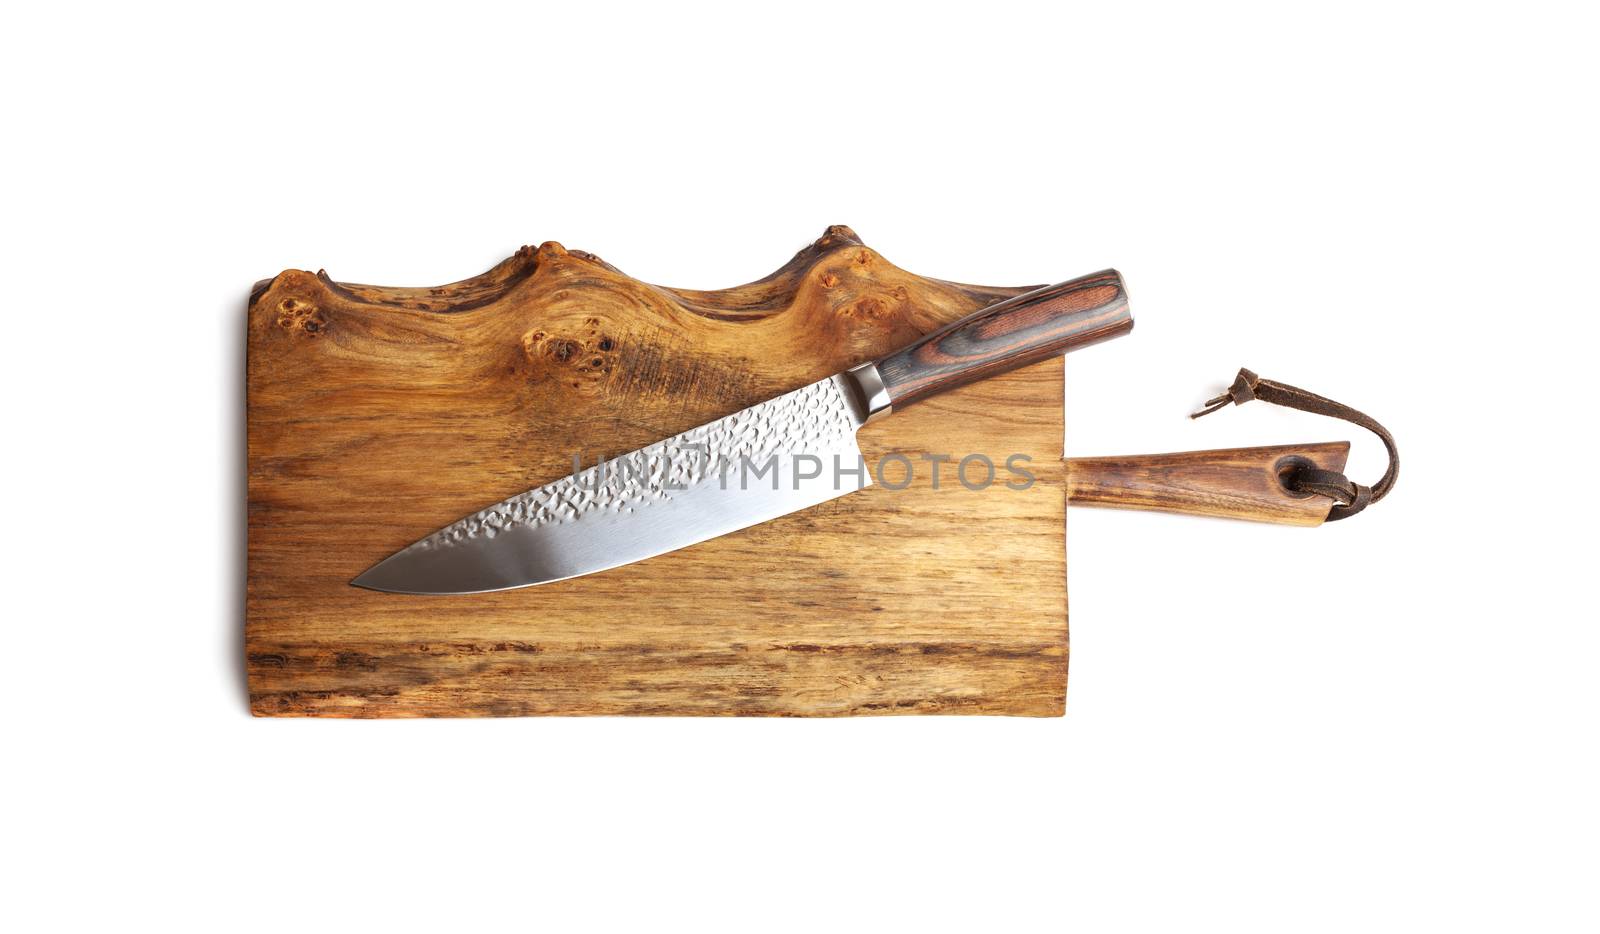 Knife for kitchen on old wooden cutting Board by SlayCer